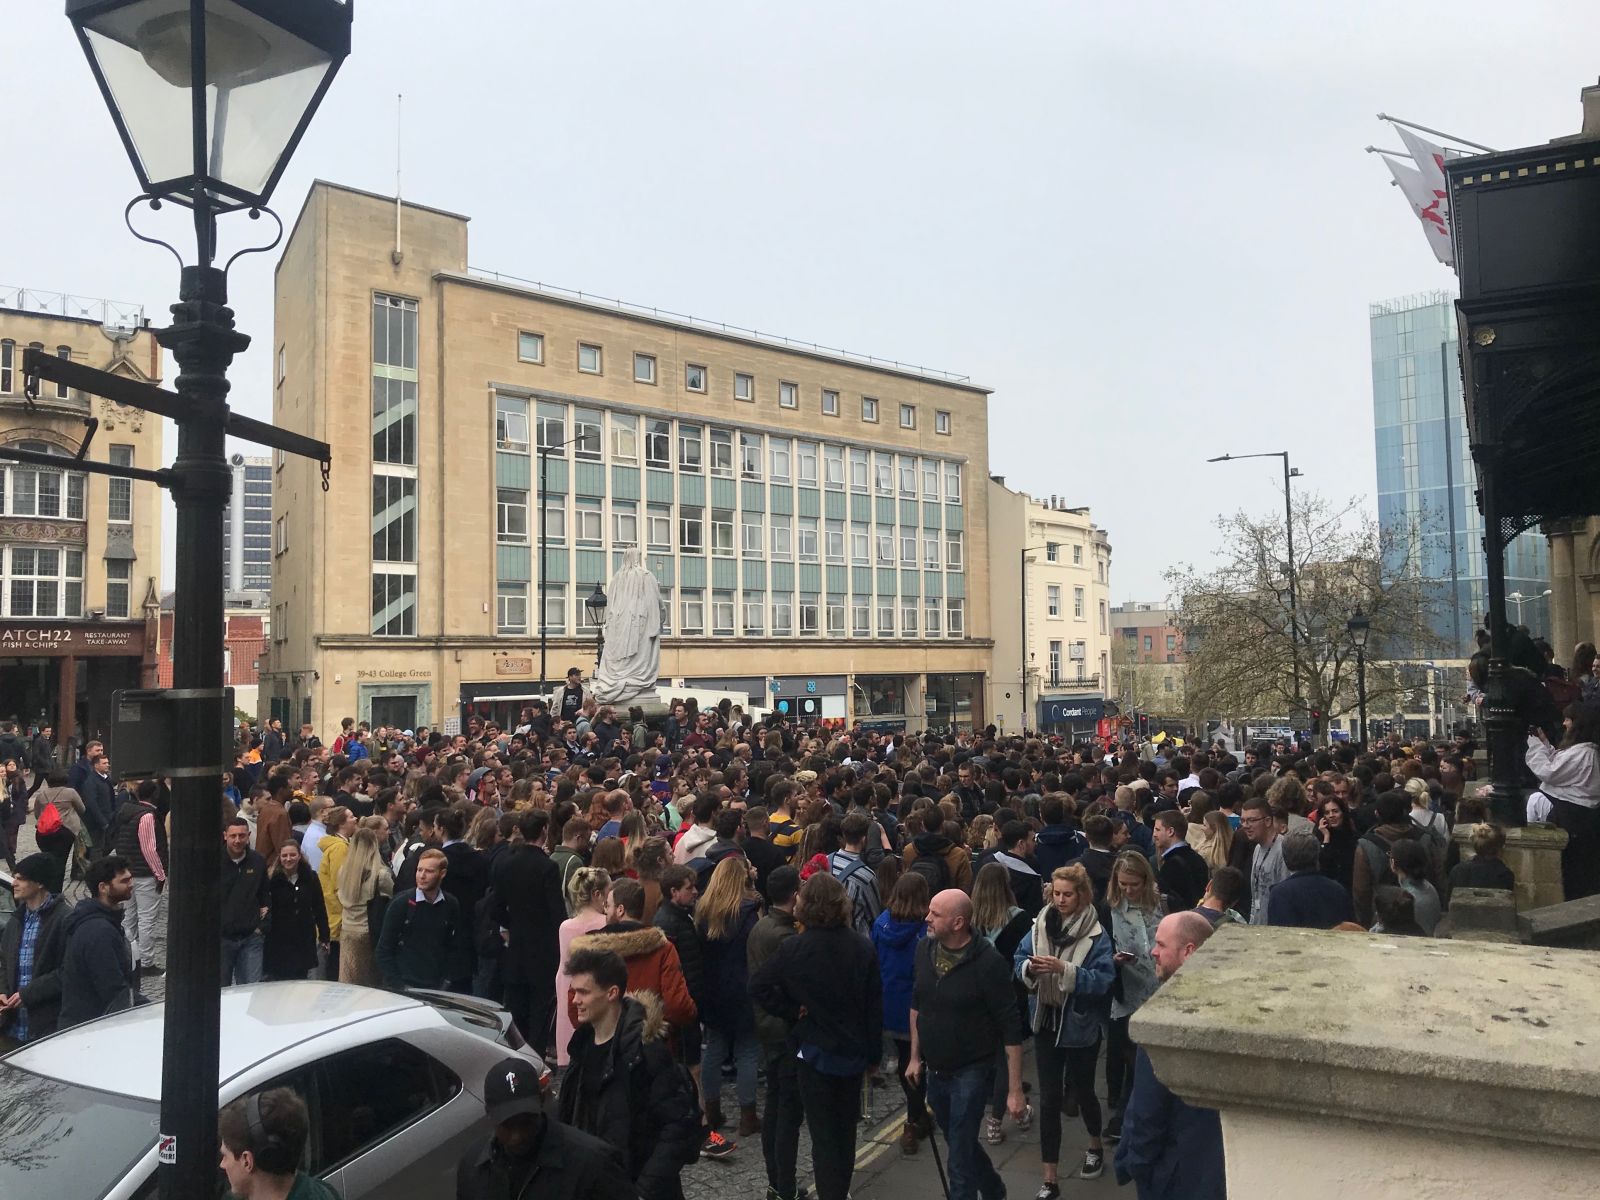 17 April 2019: Hundreds arrive at College Green for free oowee burgers 